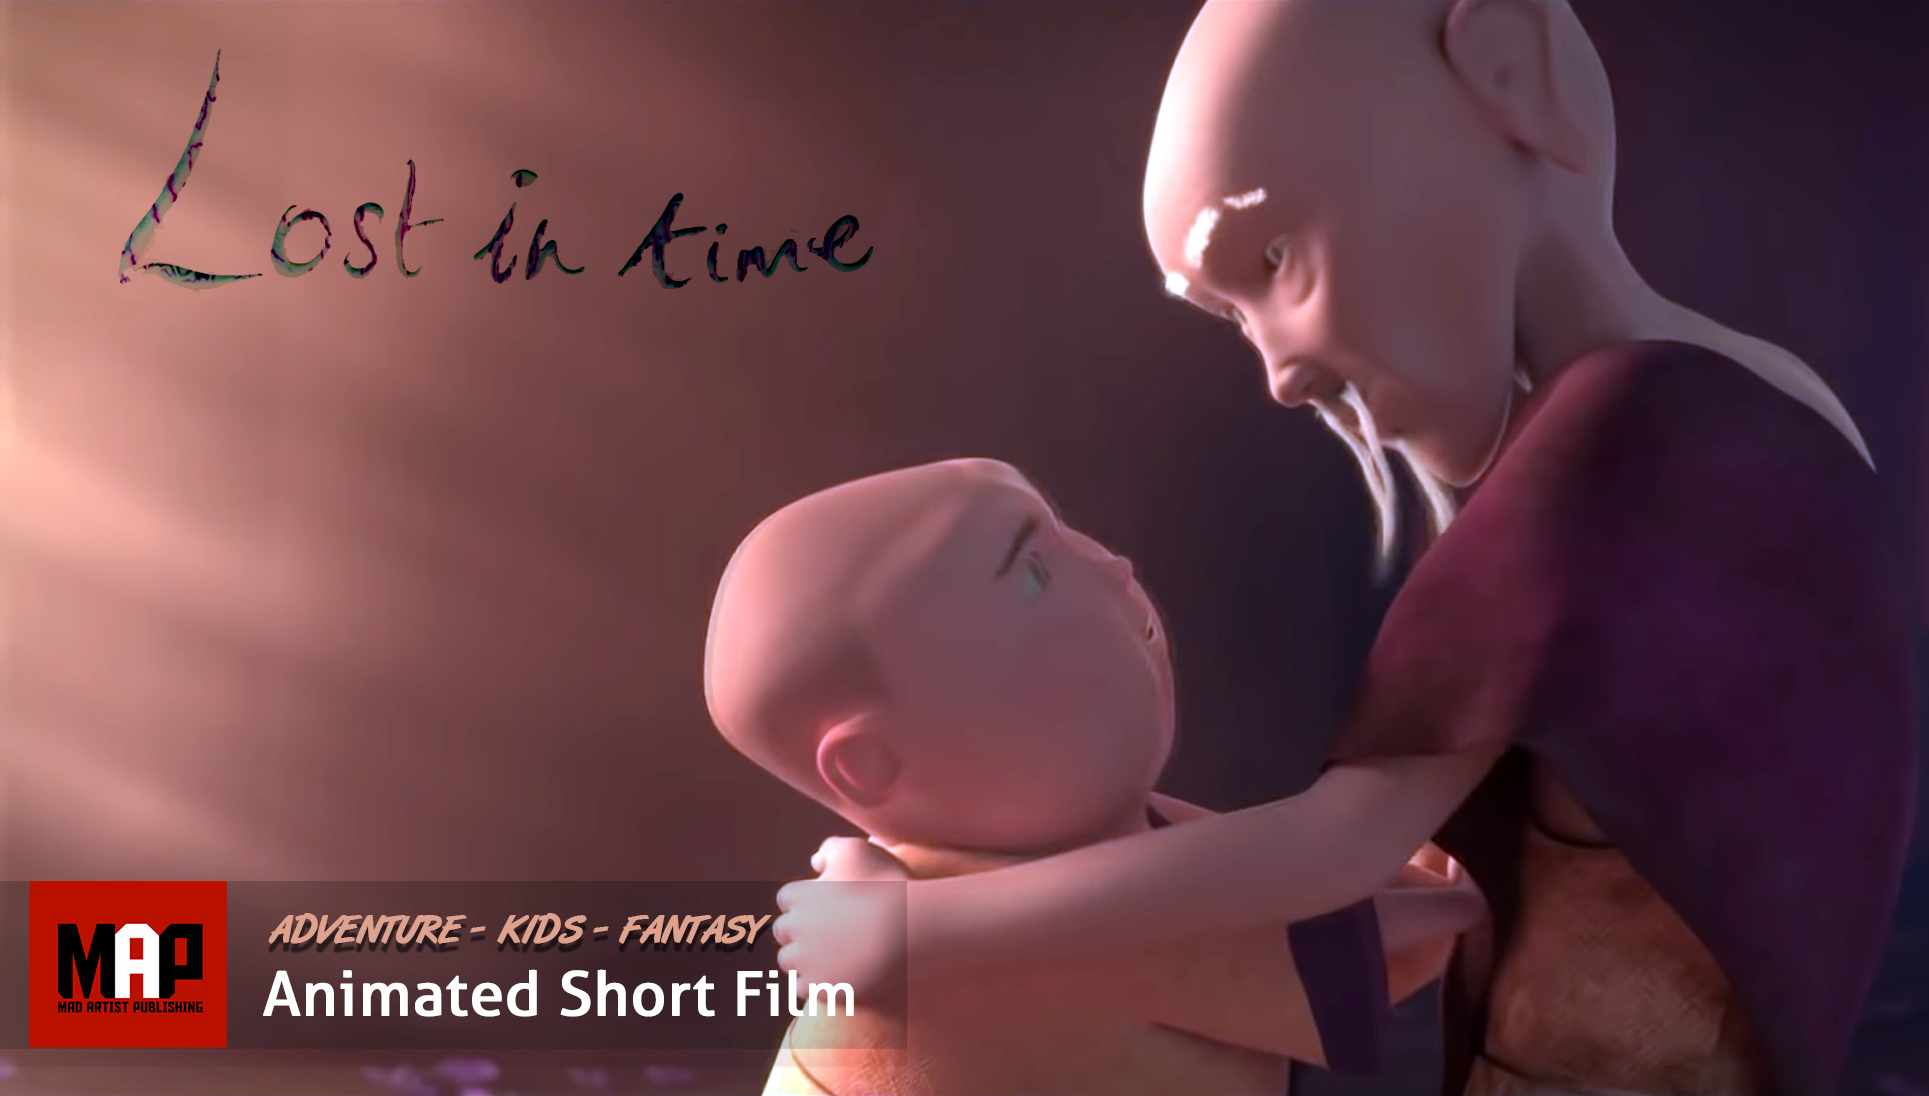 CGI 3d Animated Short Film ** LOST IN TIME ** Adventure Fantasy Animation Film by Objectif3d Team